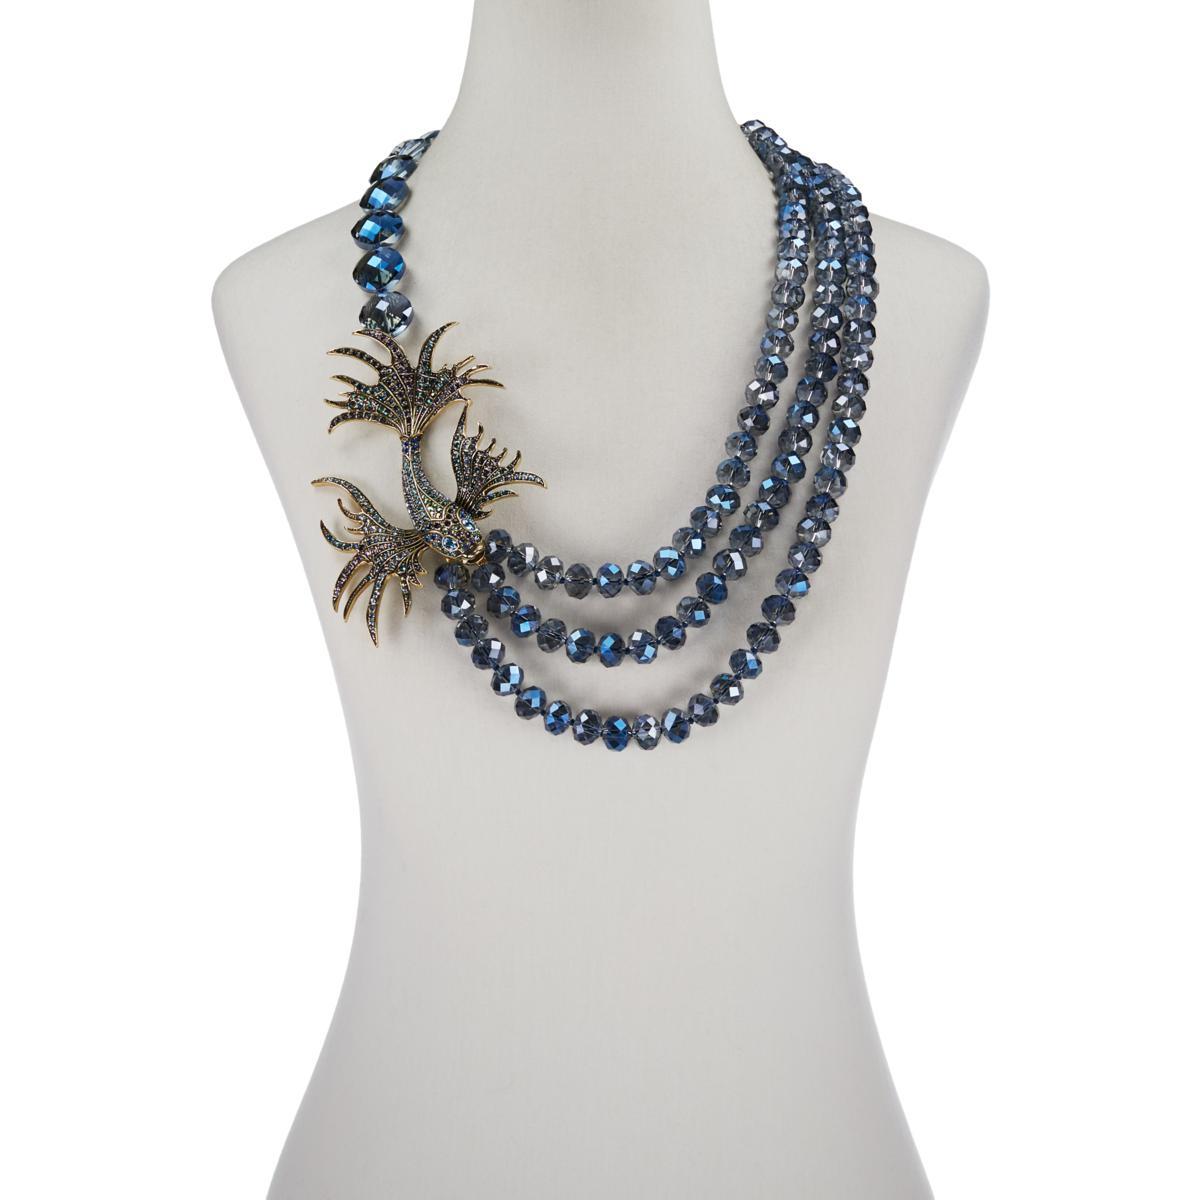 You're a reel catch! This sparkling crystal-encrusted fish design makes a stylish splash. Swimming along your décolletage, its a fun and festive way to accessorize this season.

Design Information
Asymmetrical necklace design
3 strands of